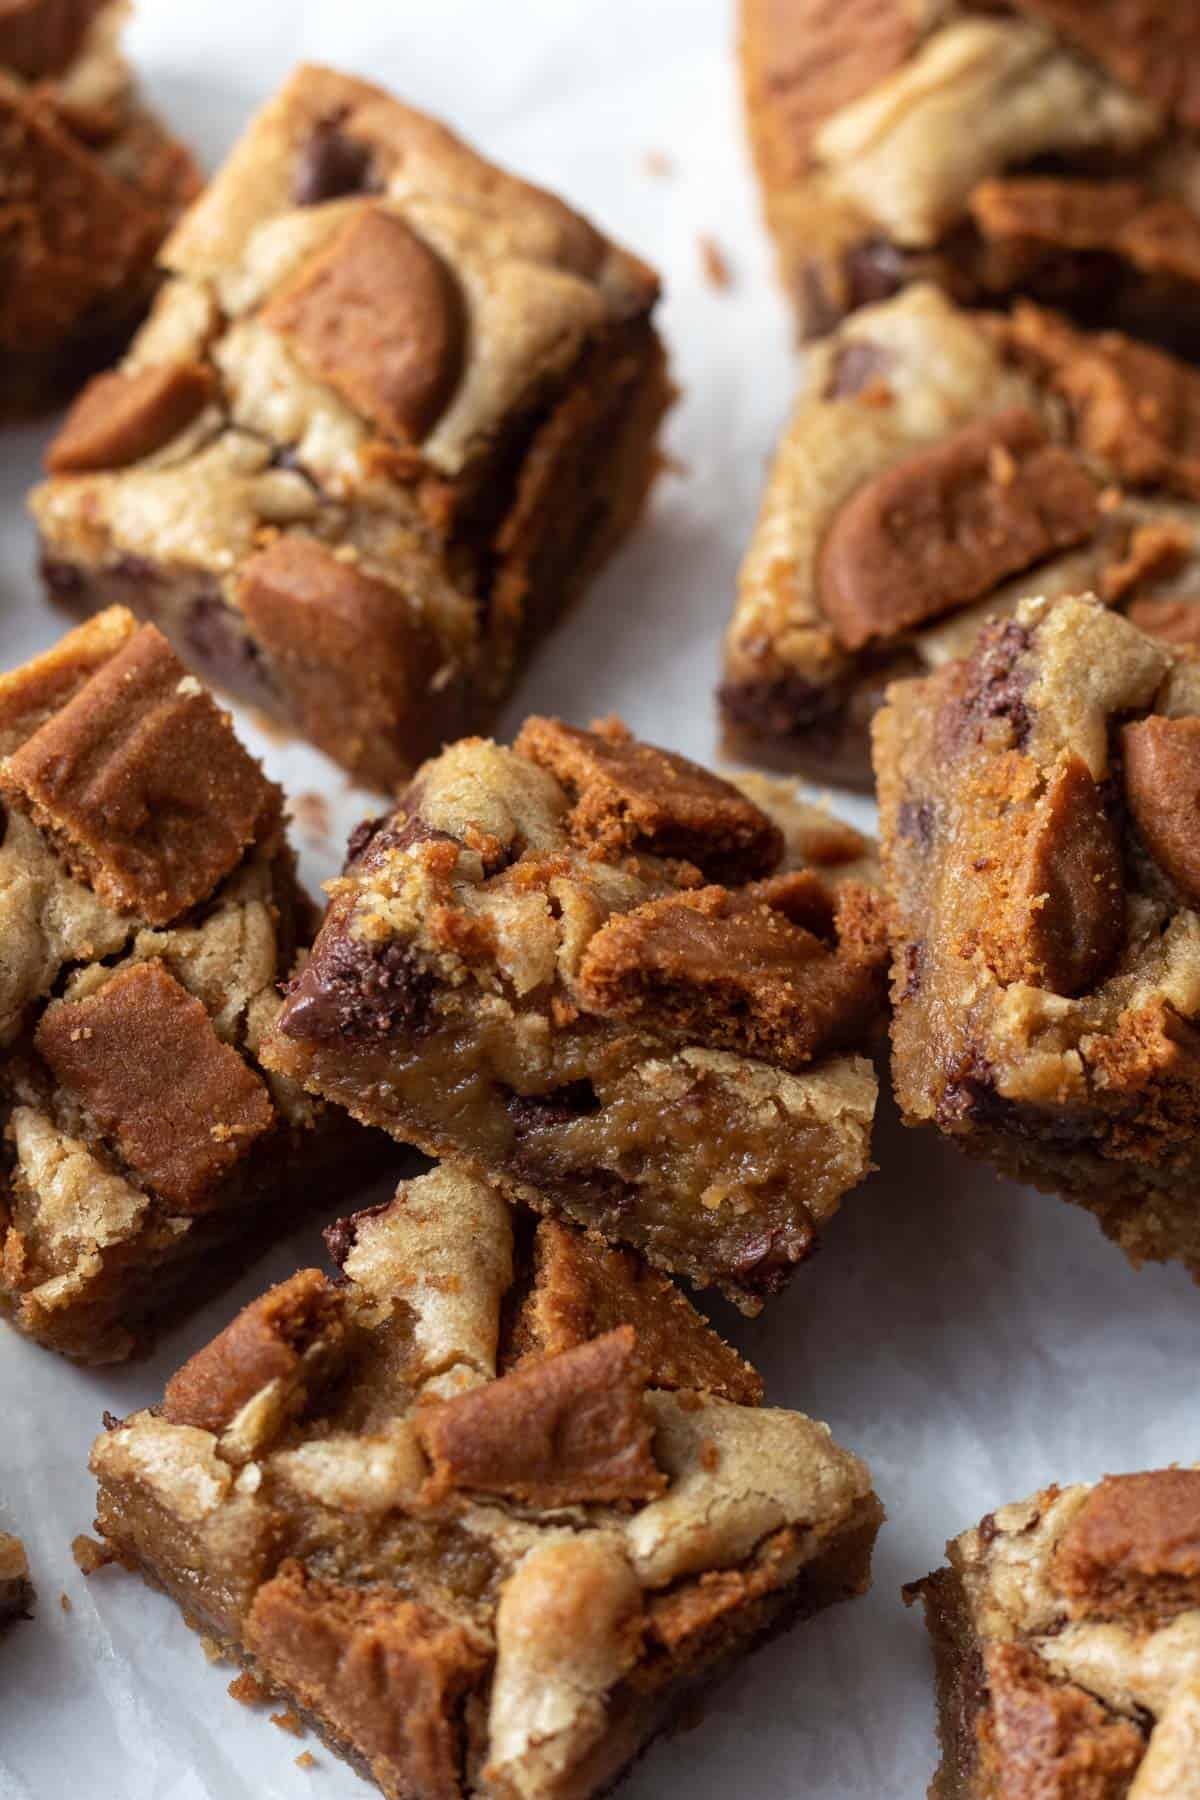 Biscoff blondie bar cut into squares with gooey center showing.